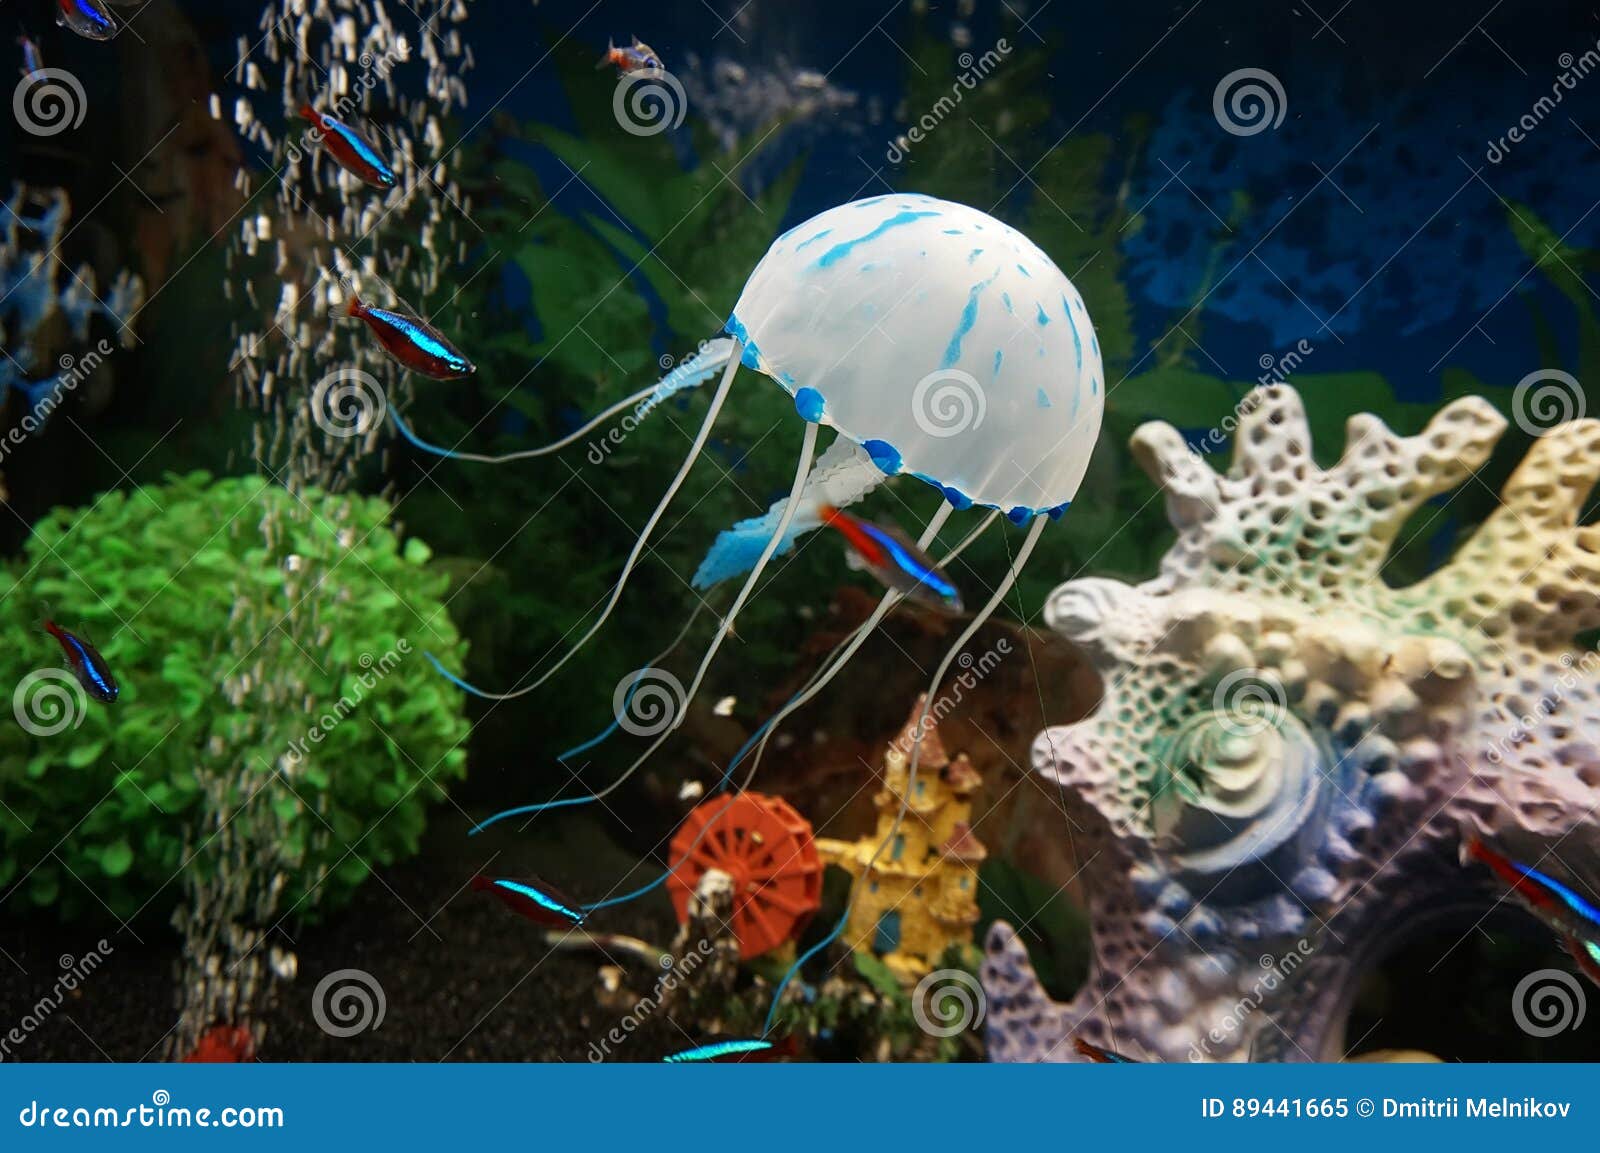 beautiful white jellyfish in the water on blue background